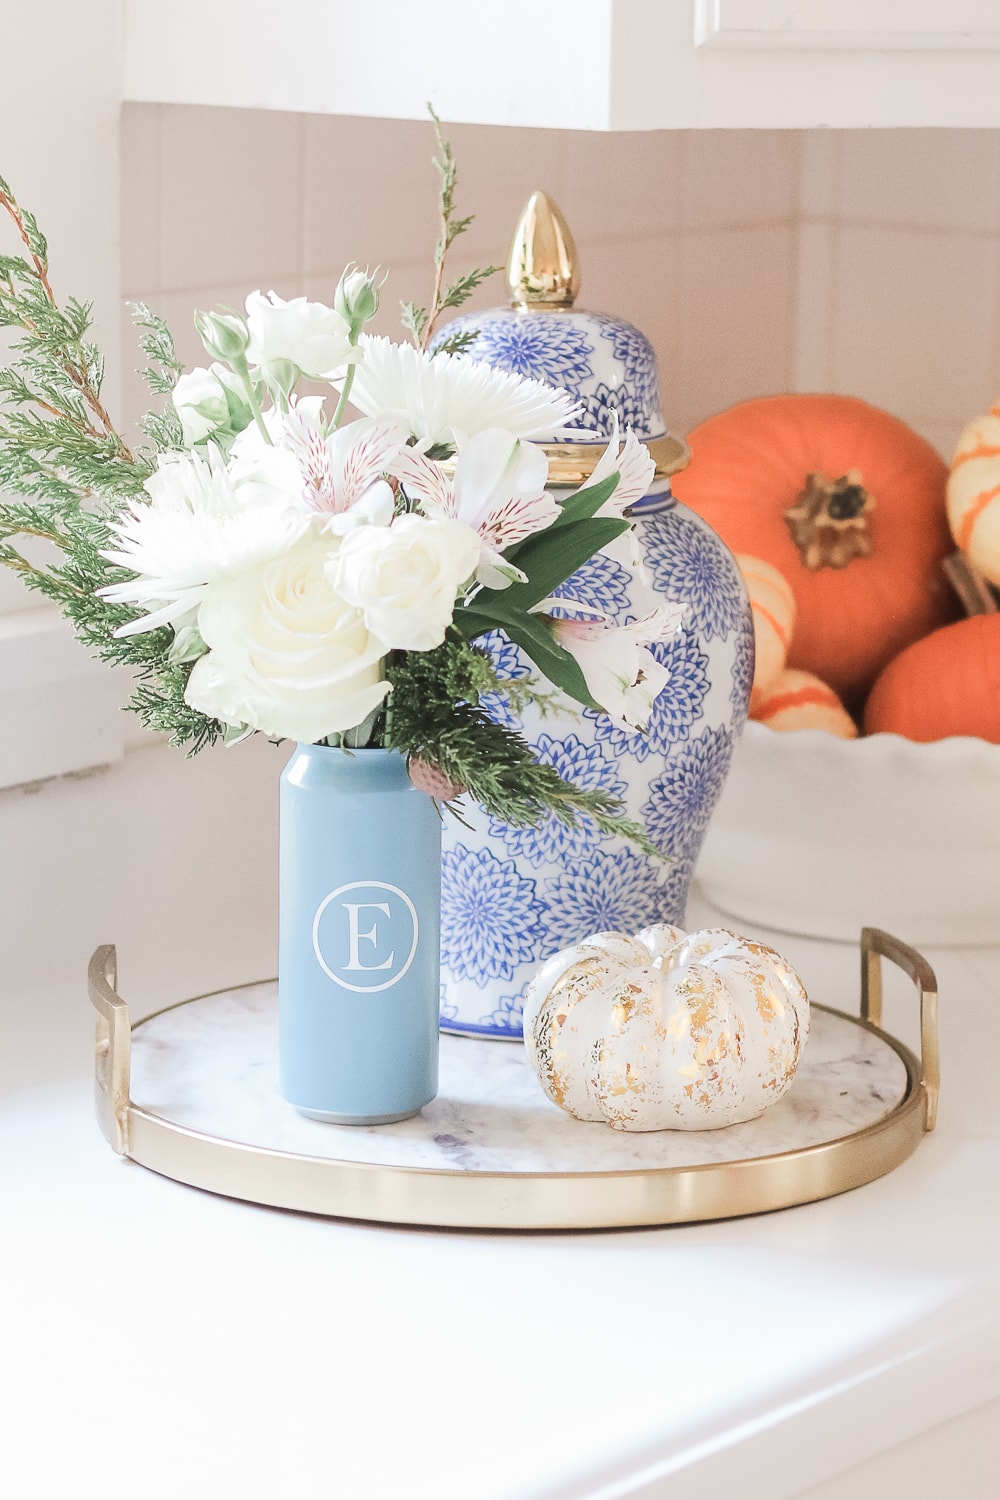 Blogger Stephanie Ziajka shares one of her favorite DIY flower vase ideas on Diary of a Debutante